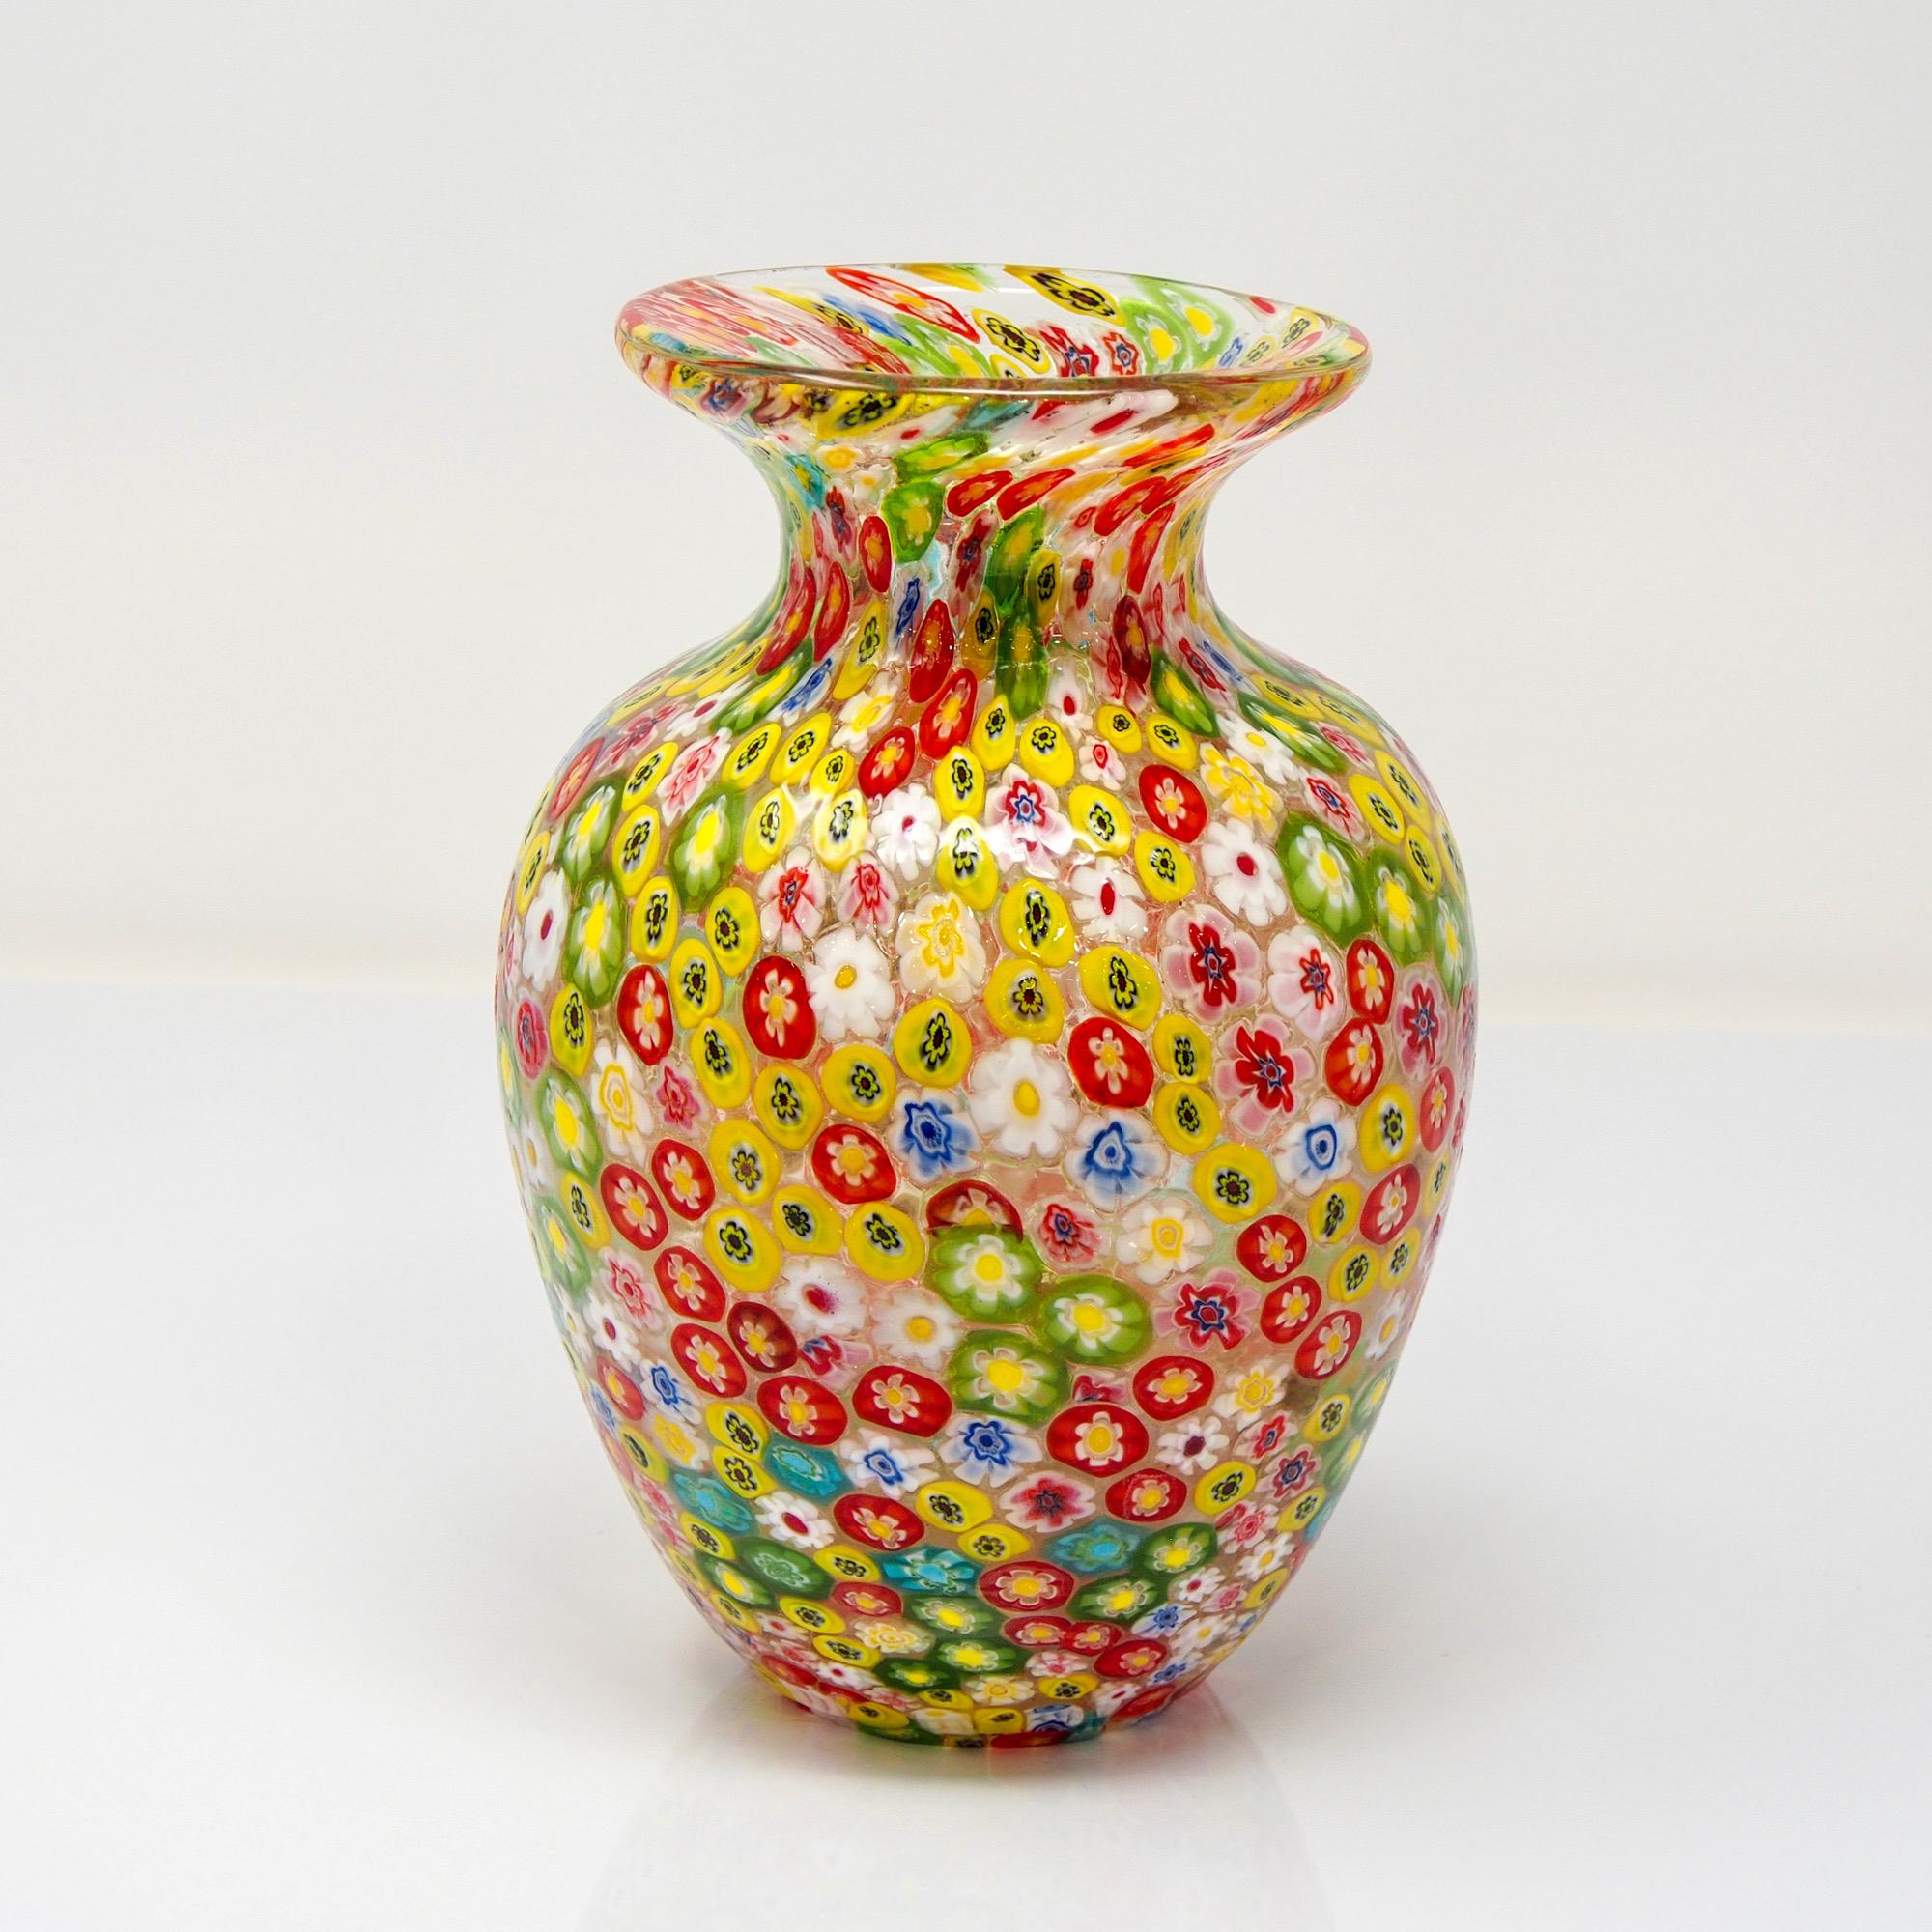 Circa 1970s Murano glass millefiori vase in shades of yellow, green and red. Medium size at 8.5” tall with classic shape. No signature found. 

Very good vintage condition with very minor scattered surface wear but no chips, cracks, flakes or